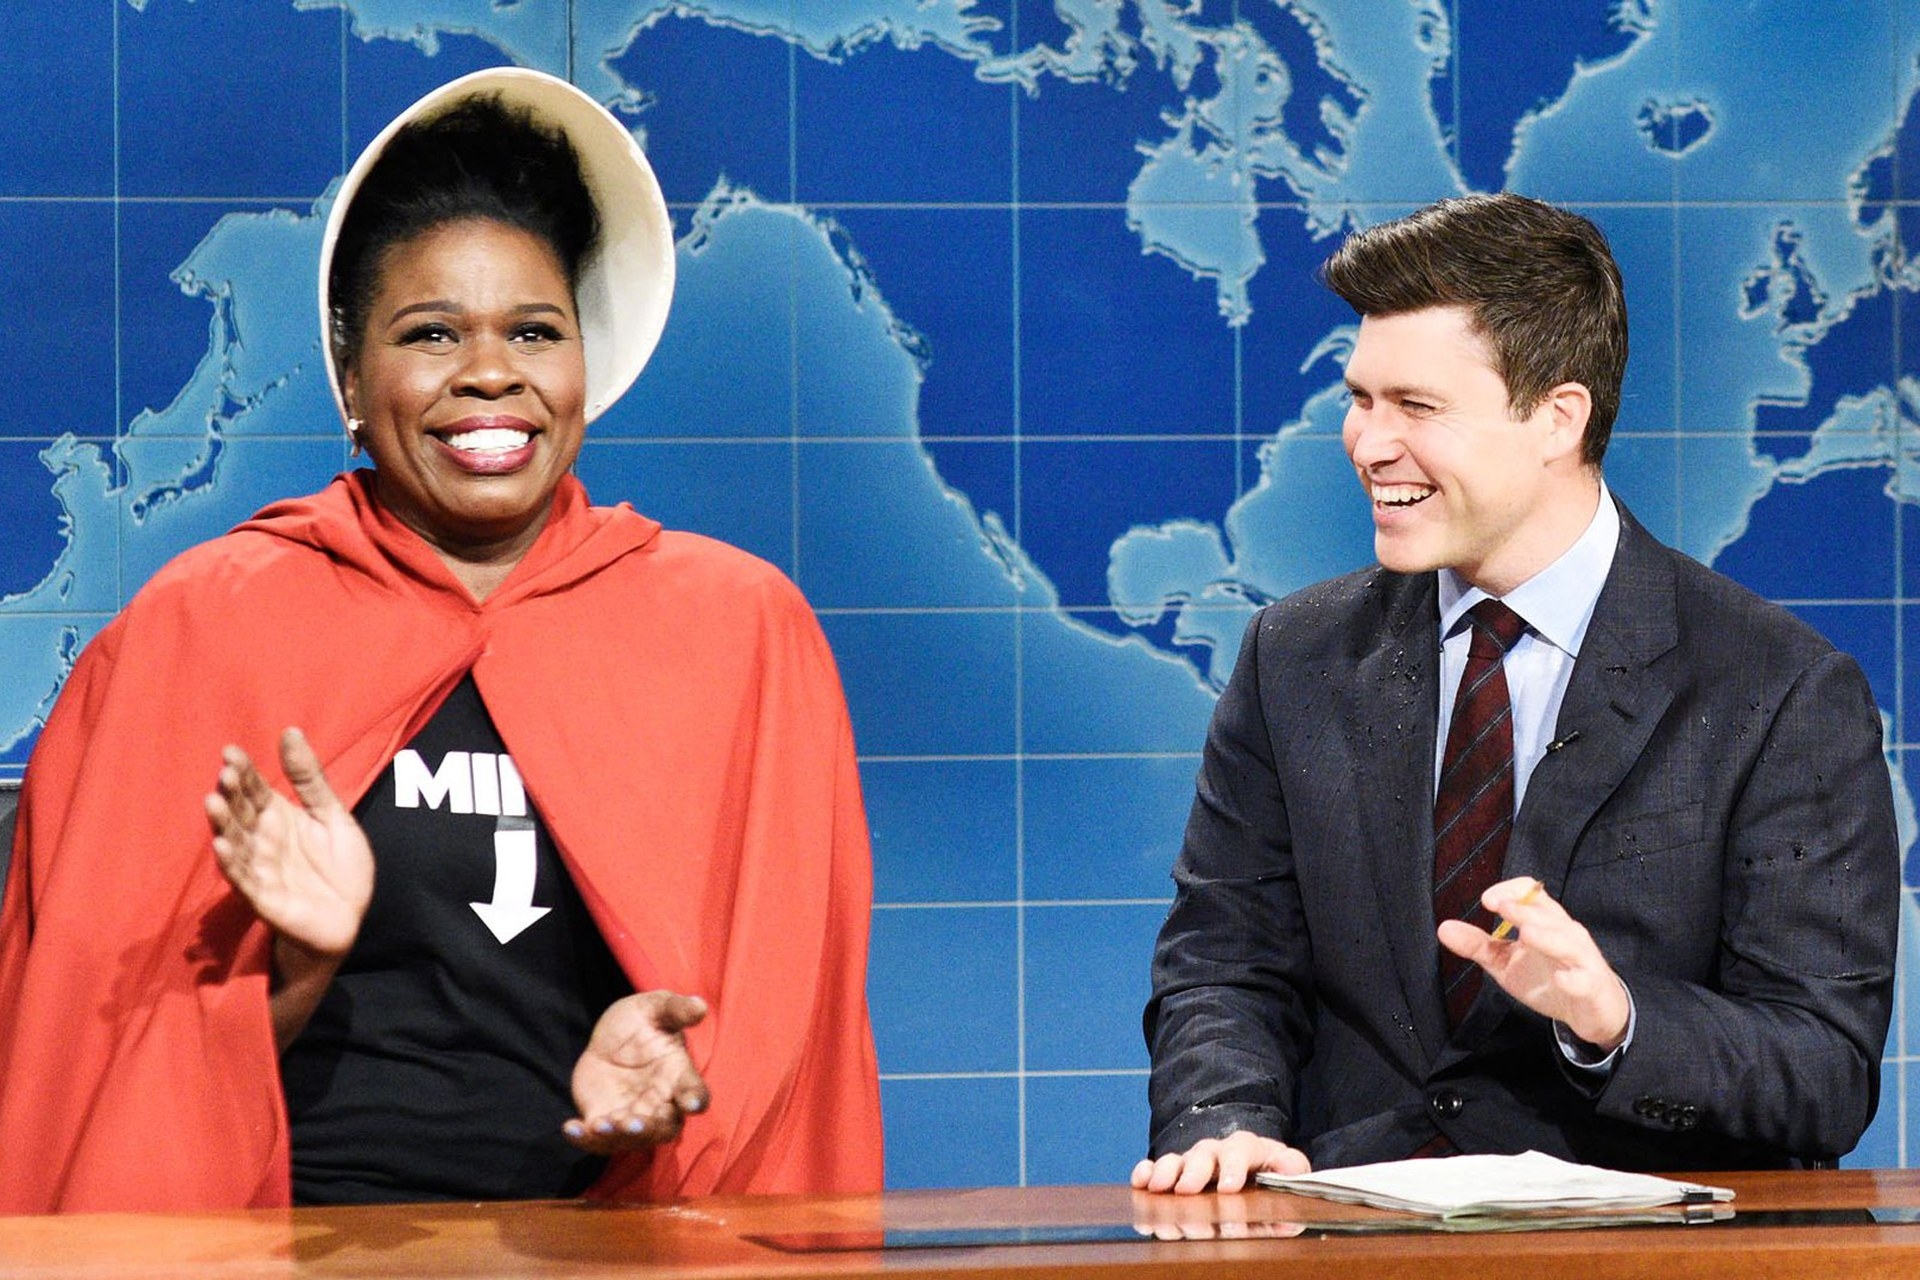 “You Can’t Make Me Small”: Saturday Night Live Takes on Abortion Rights With Leslie Jones